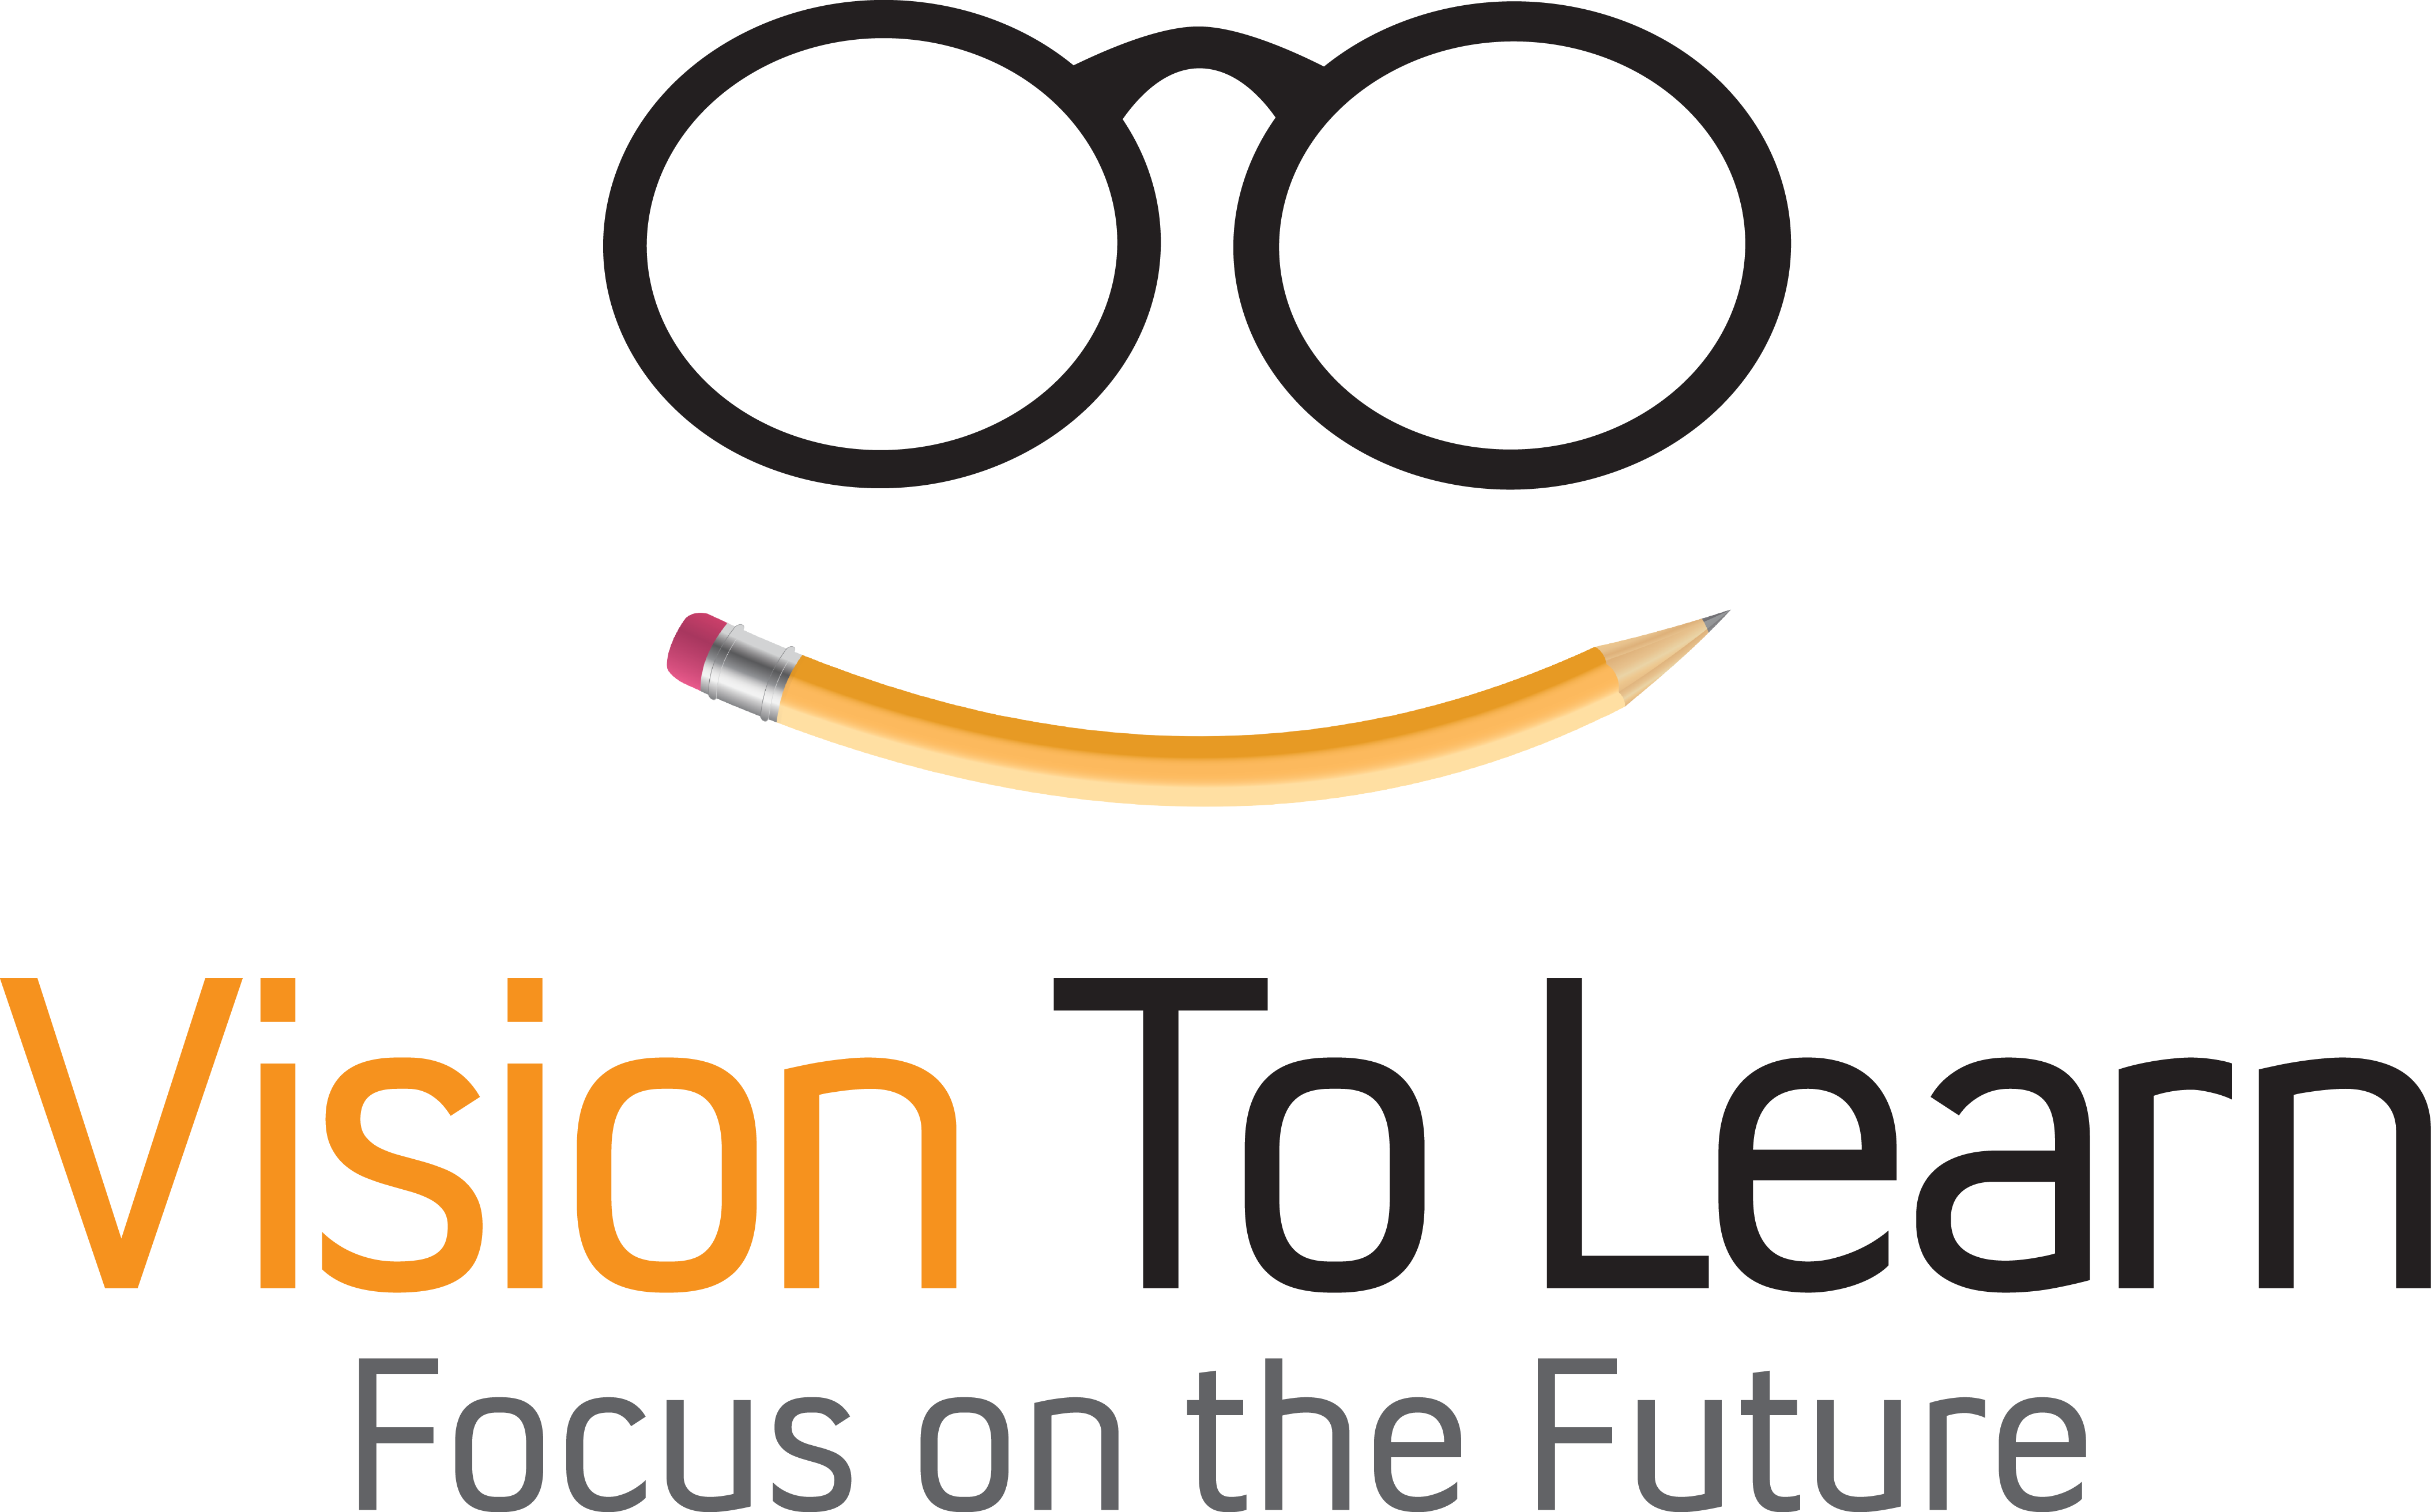 Vision-to-Learn